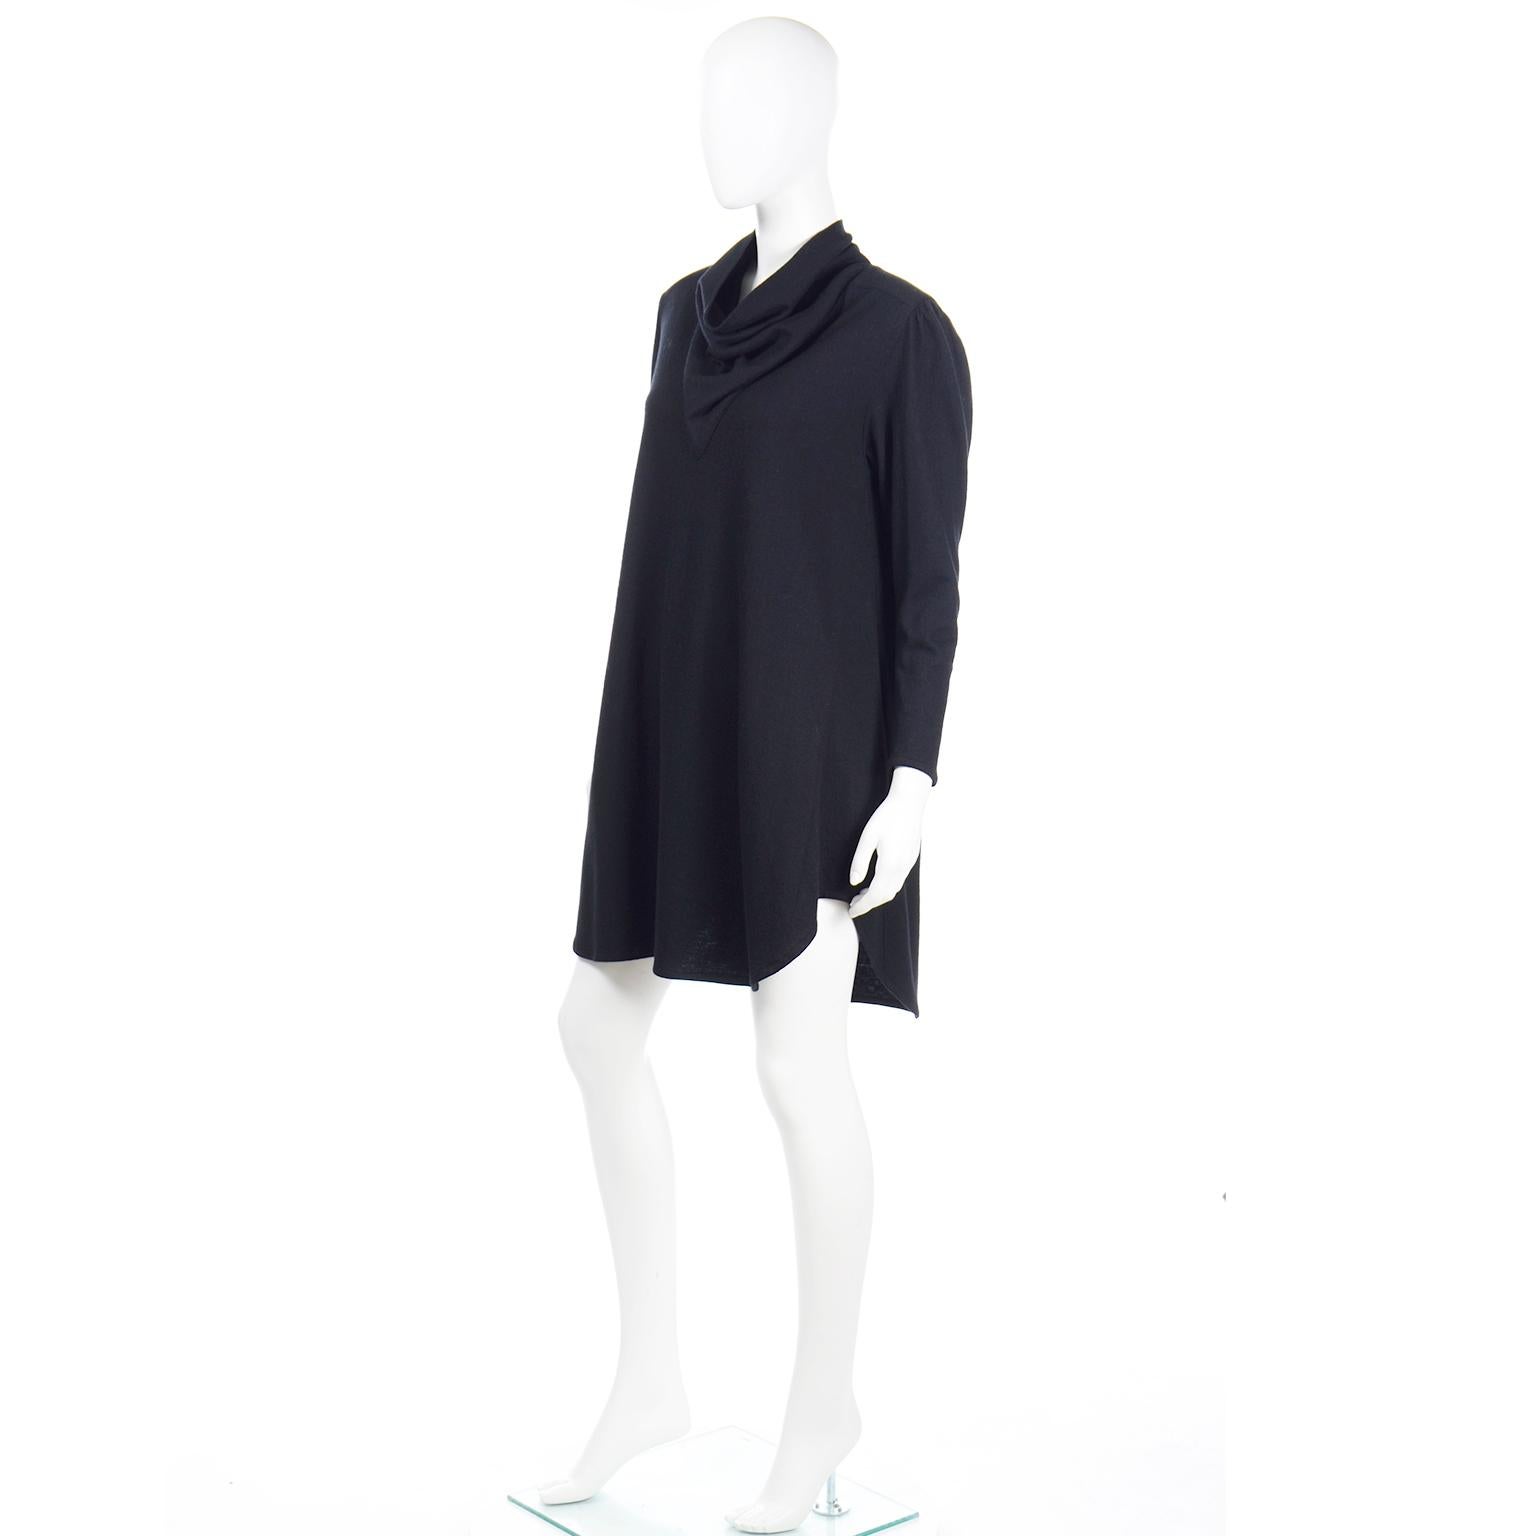 Issey Miyake 1980s vintage Black Wool Blend Knit Tent Style Dress or Tunic 1